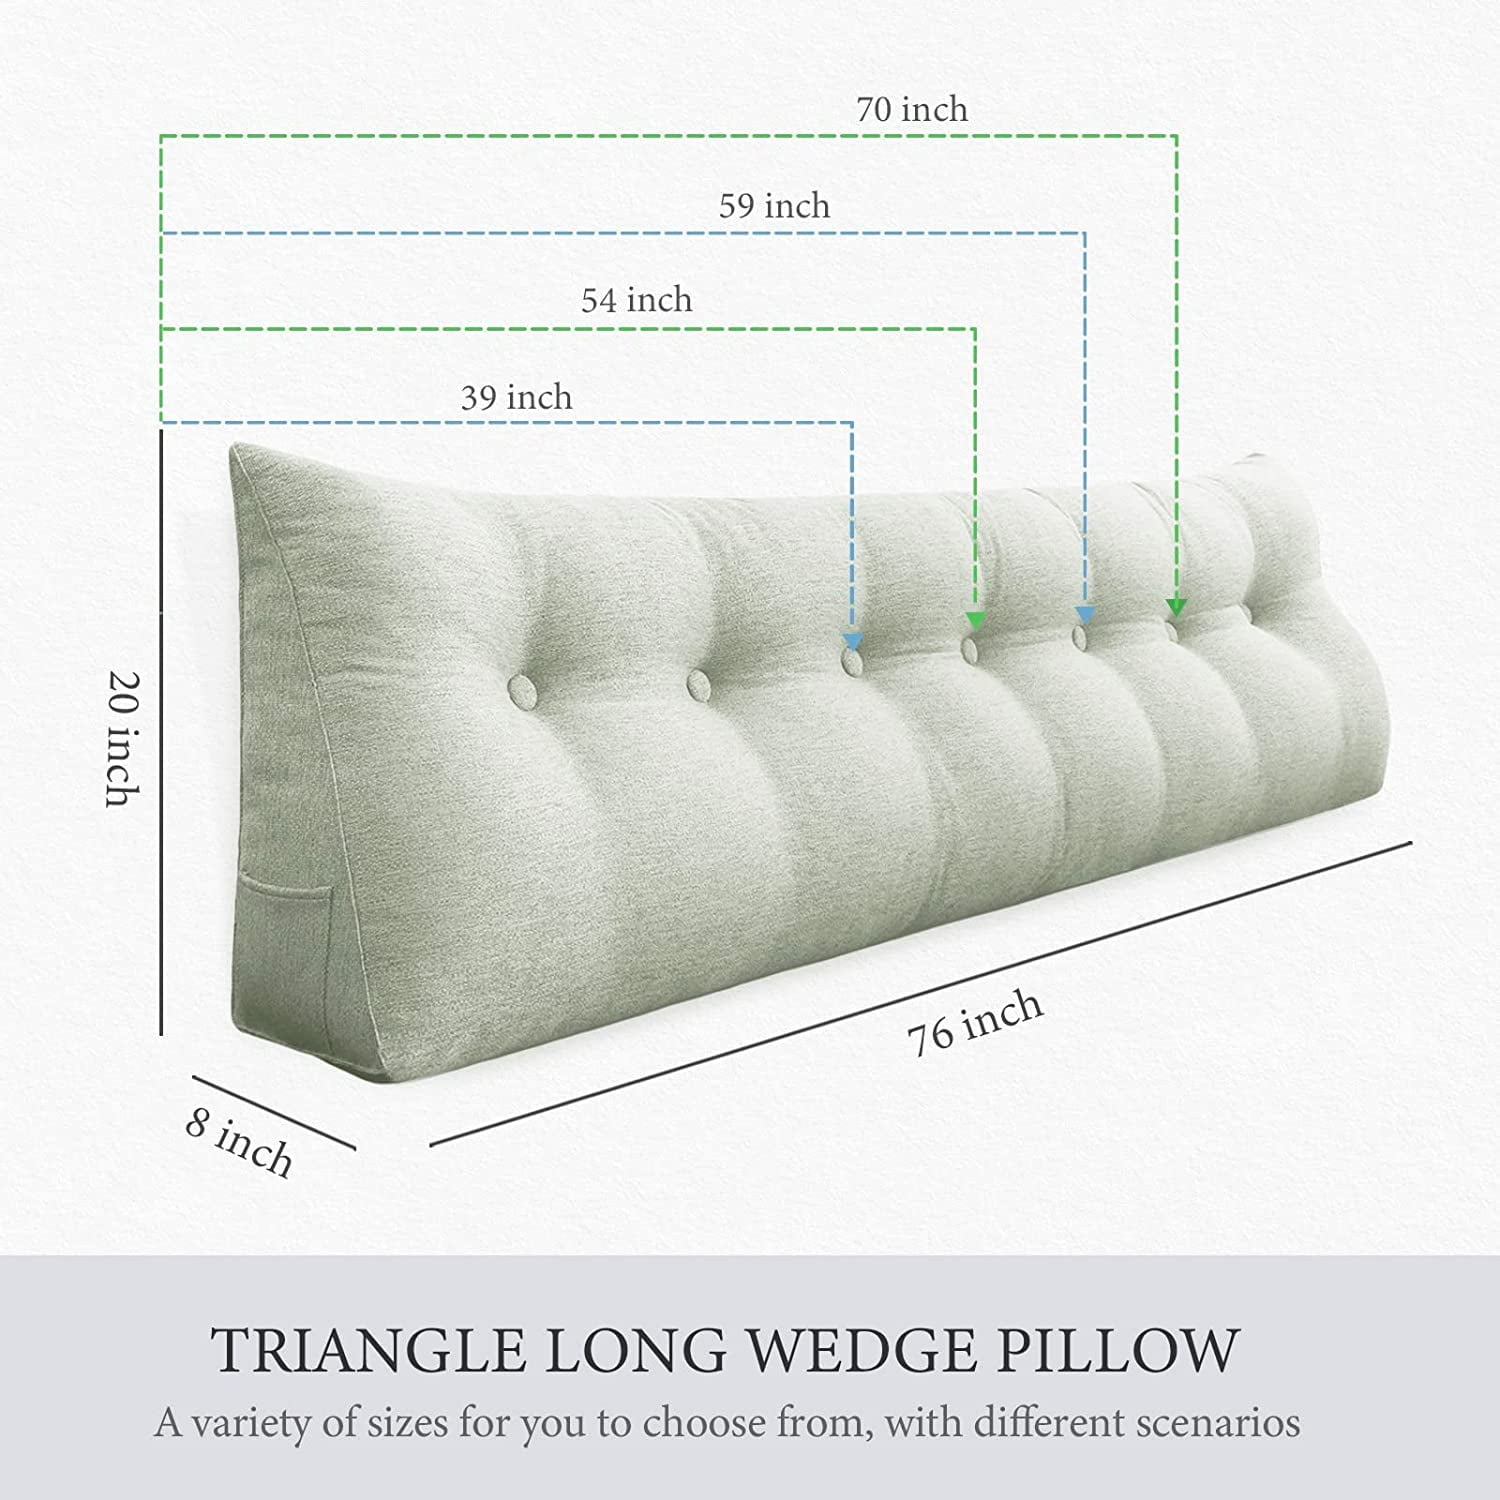 Typical measurement for bed, pillow, and wedge system at 20